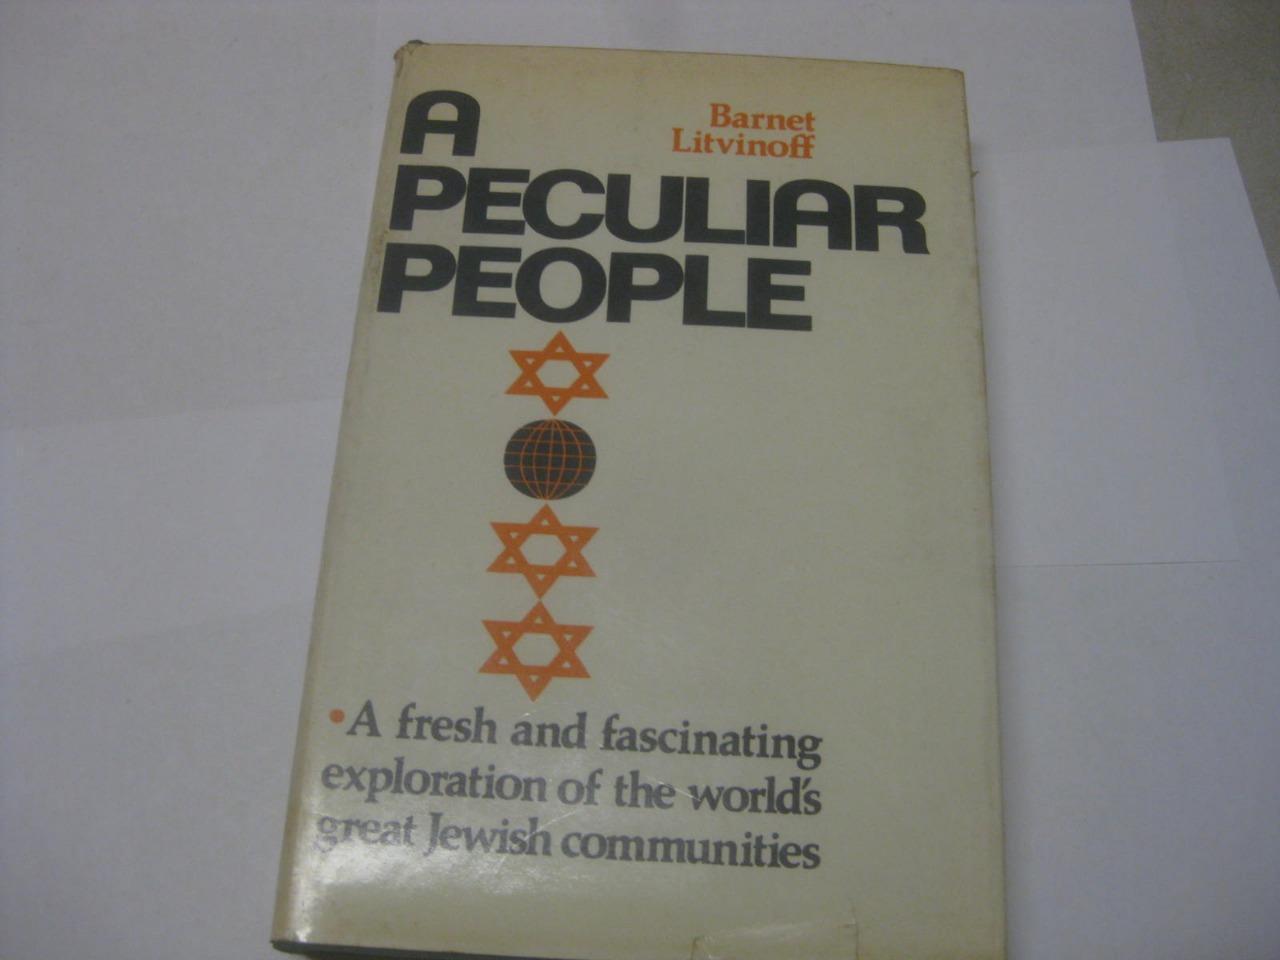 Peculiar People: Inside World Jewry Today by Barnet Litvinoff